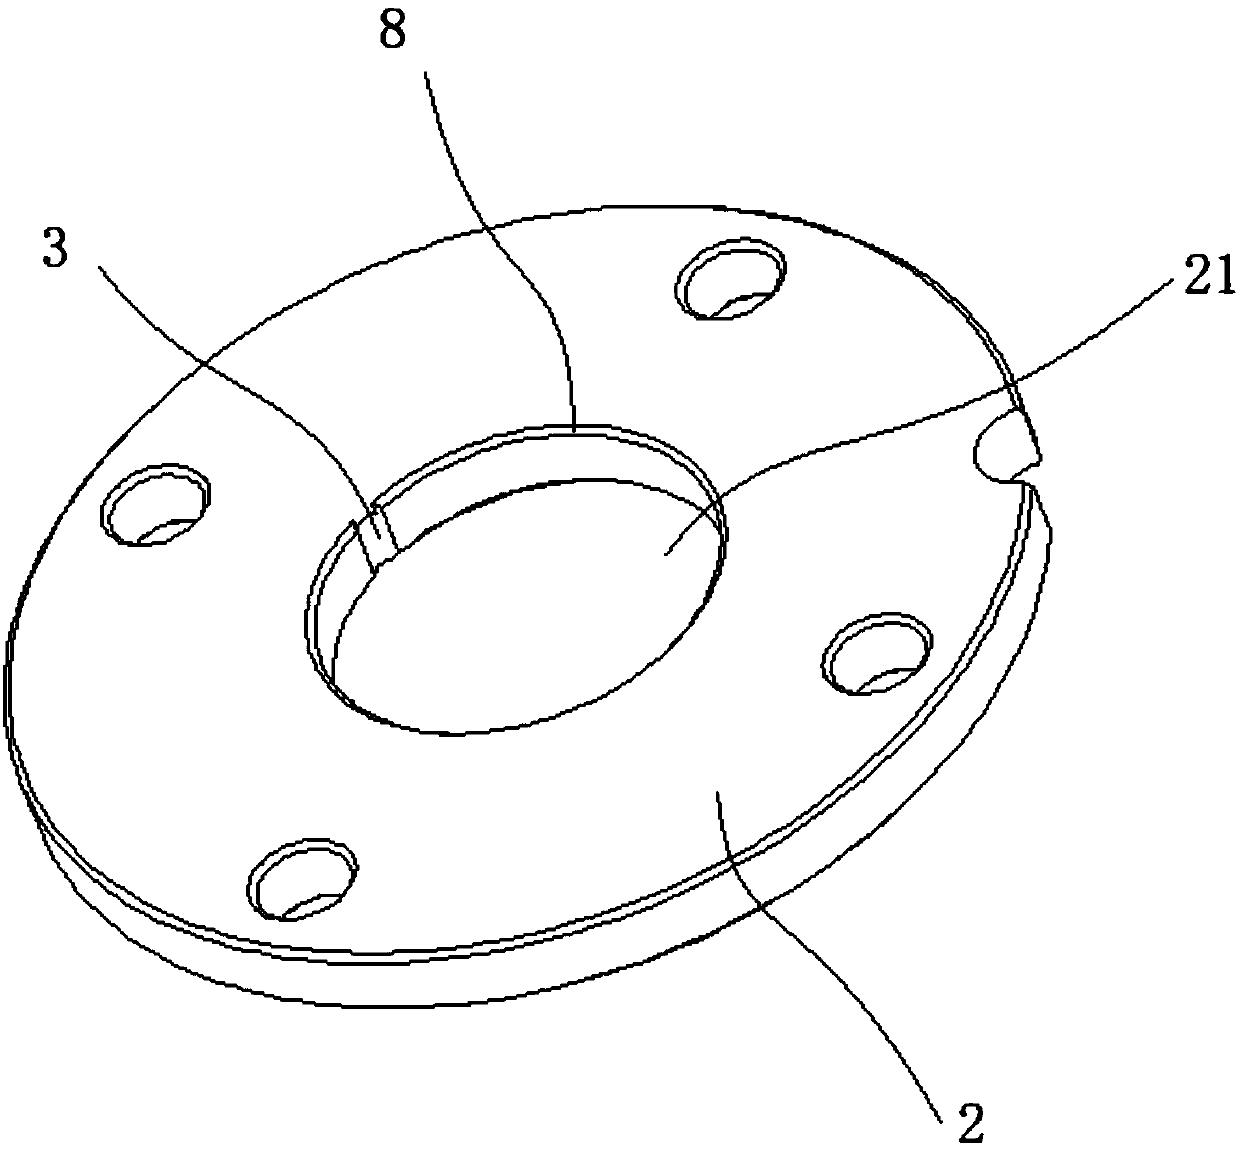 Pump body structure of rotary cylinder piston compressor and rotary cylinder piston compressor